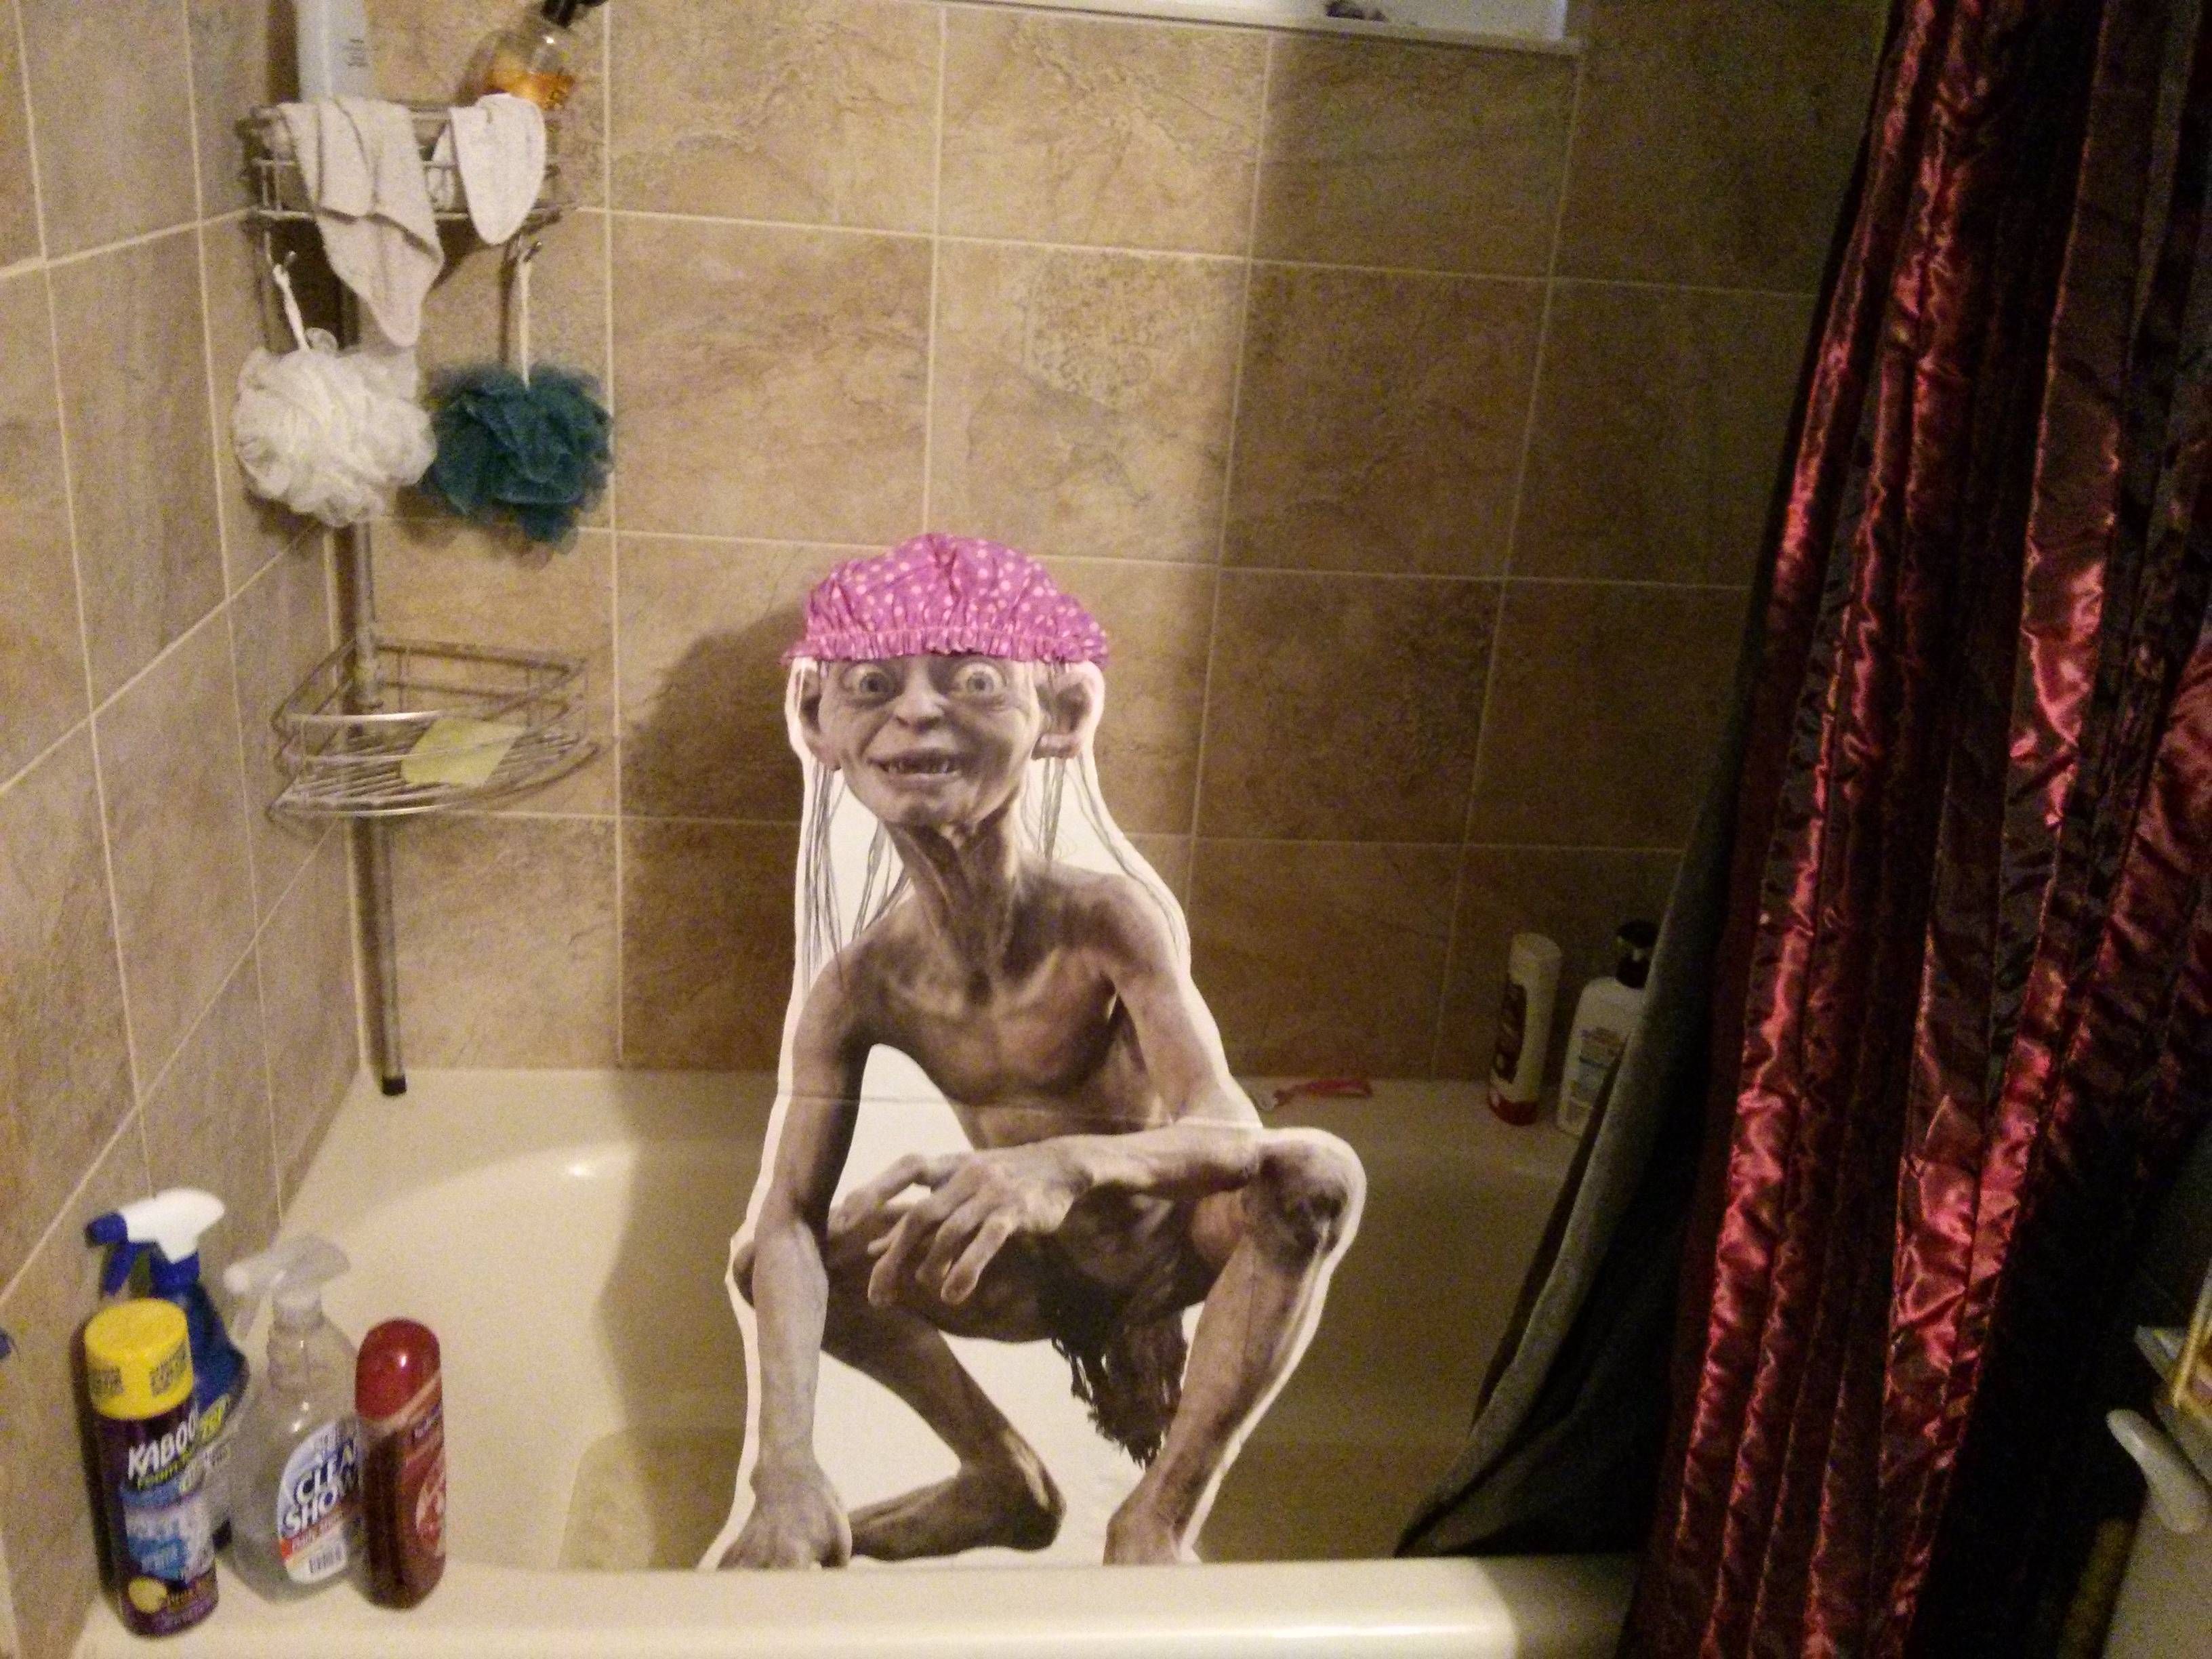 I found a Smeagol cutout at a flea market. I live with two other people. Let the games begin.